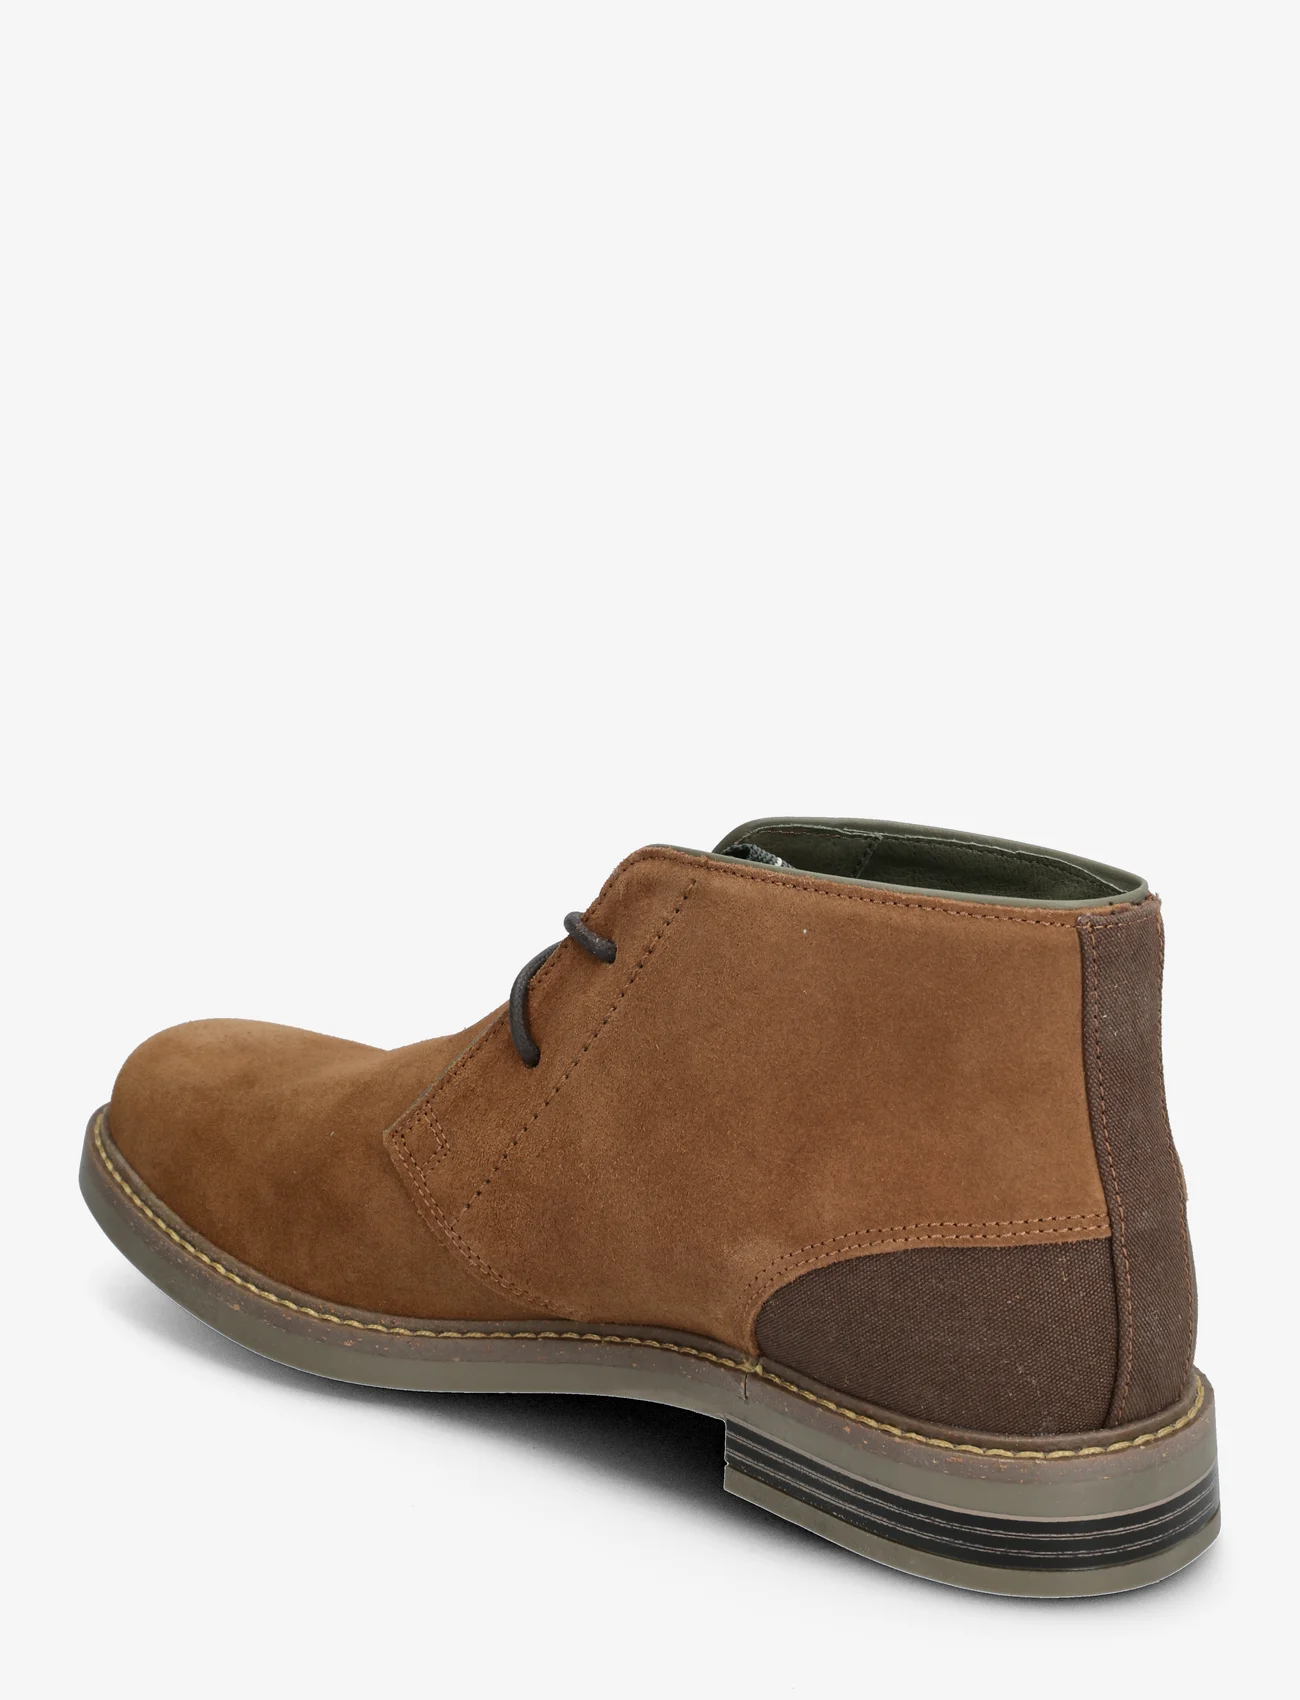 Barbour - Barbour Readhead - shop by style - fawn suede - 2